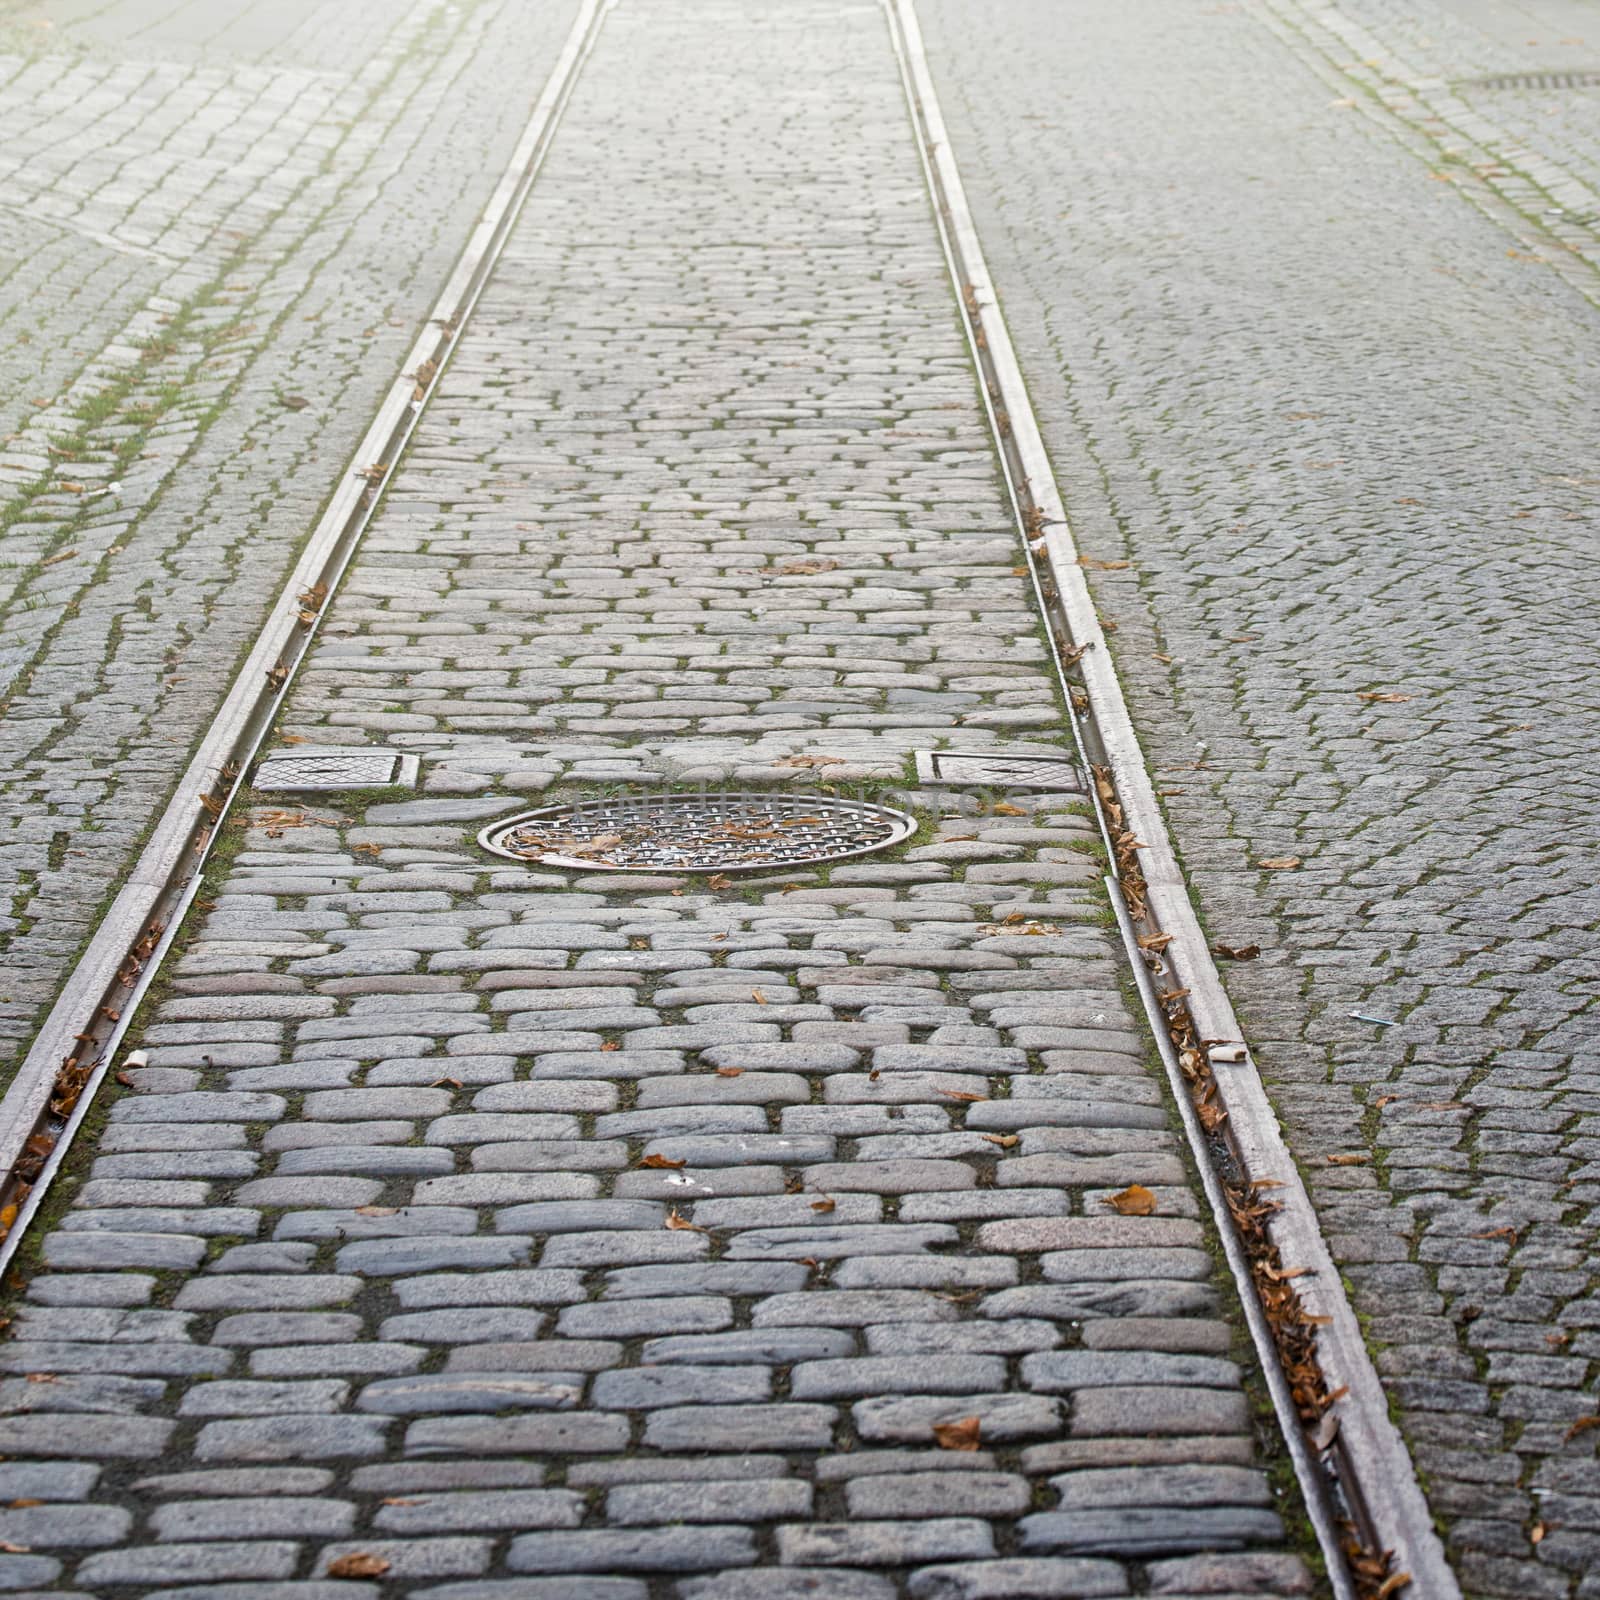 Tram rails and manhole cover on the street in Bergen, Norway